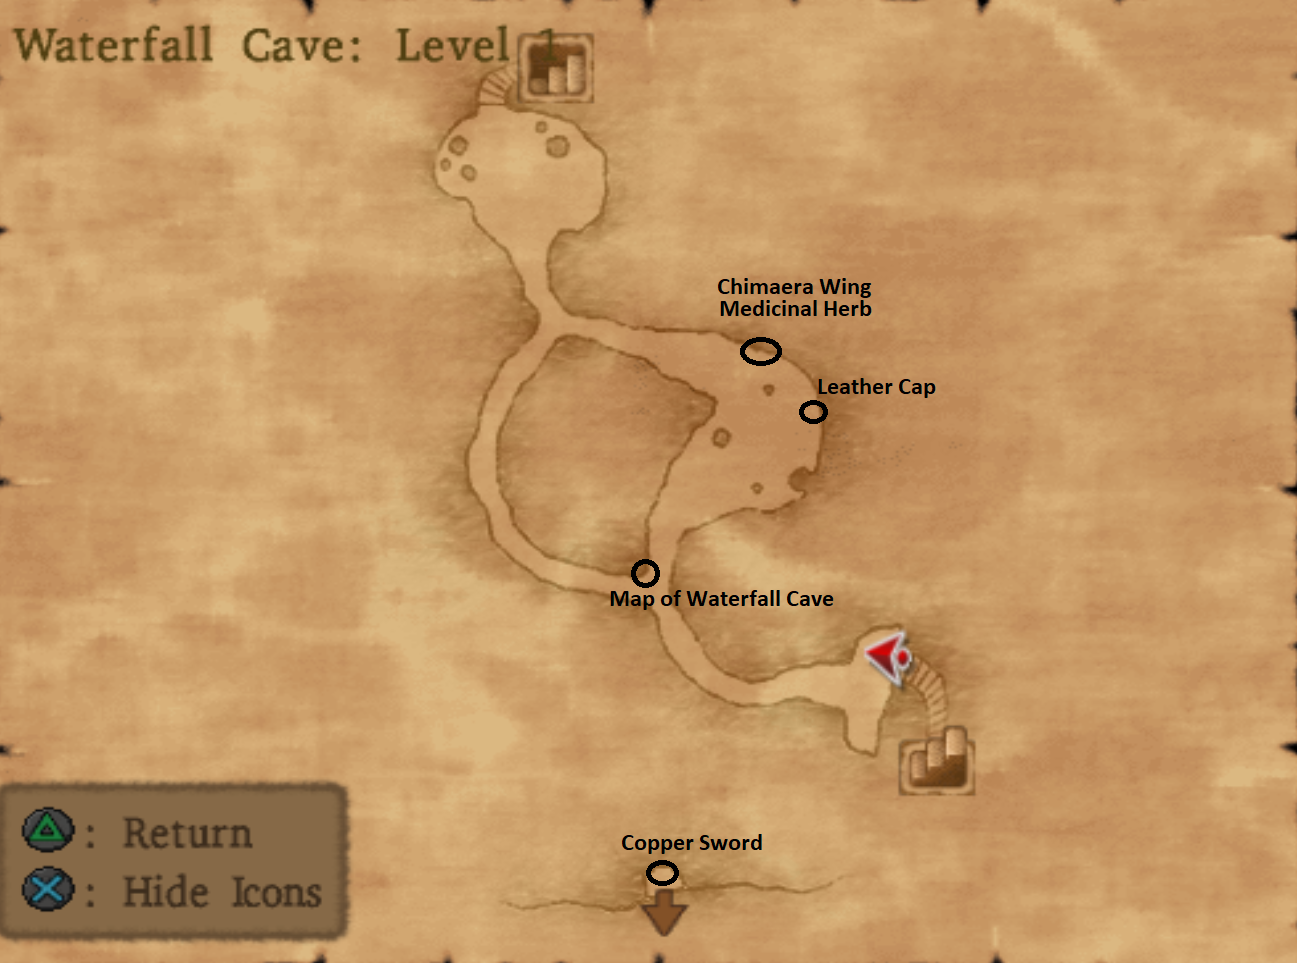 Waterfall Cave Level 1